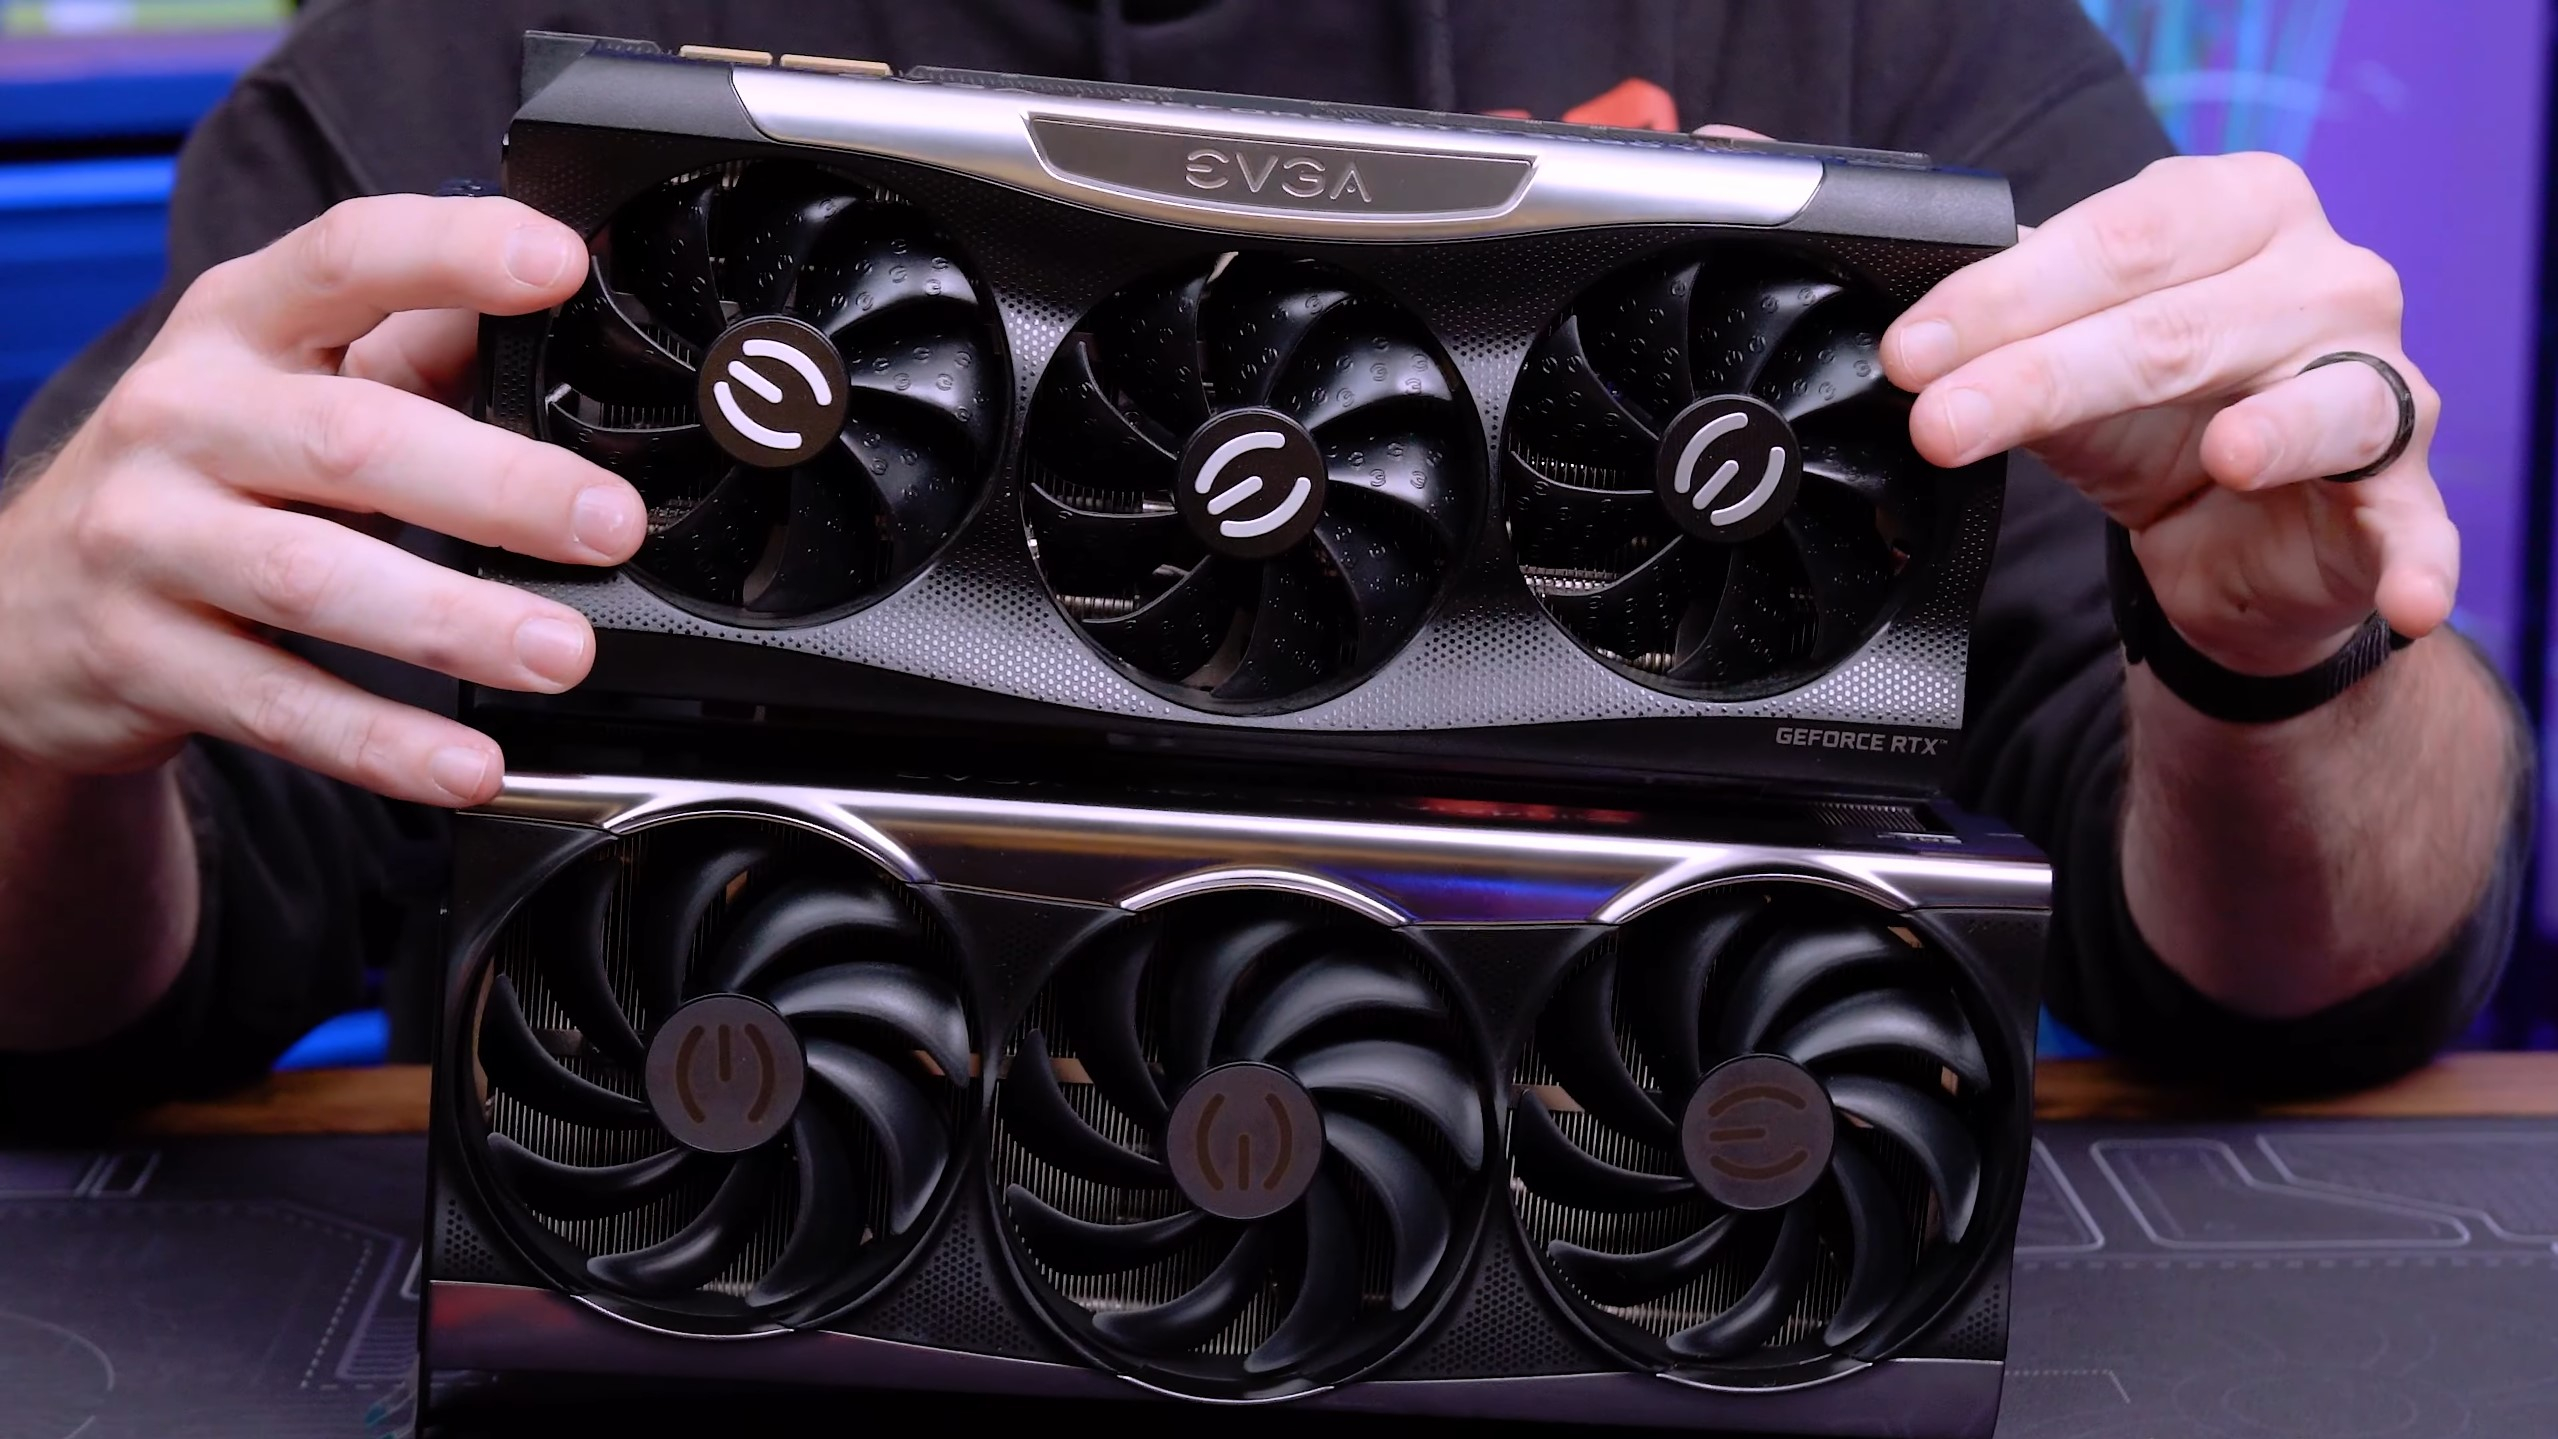 Bloggers showed a prototype GeForce RTX 4090 from EVGA, which will never be released again